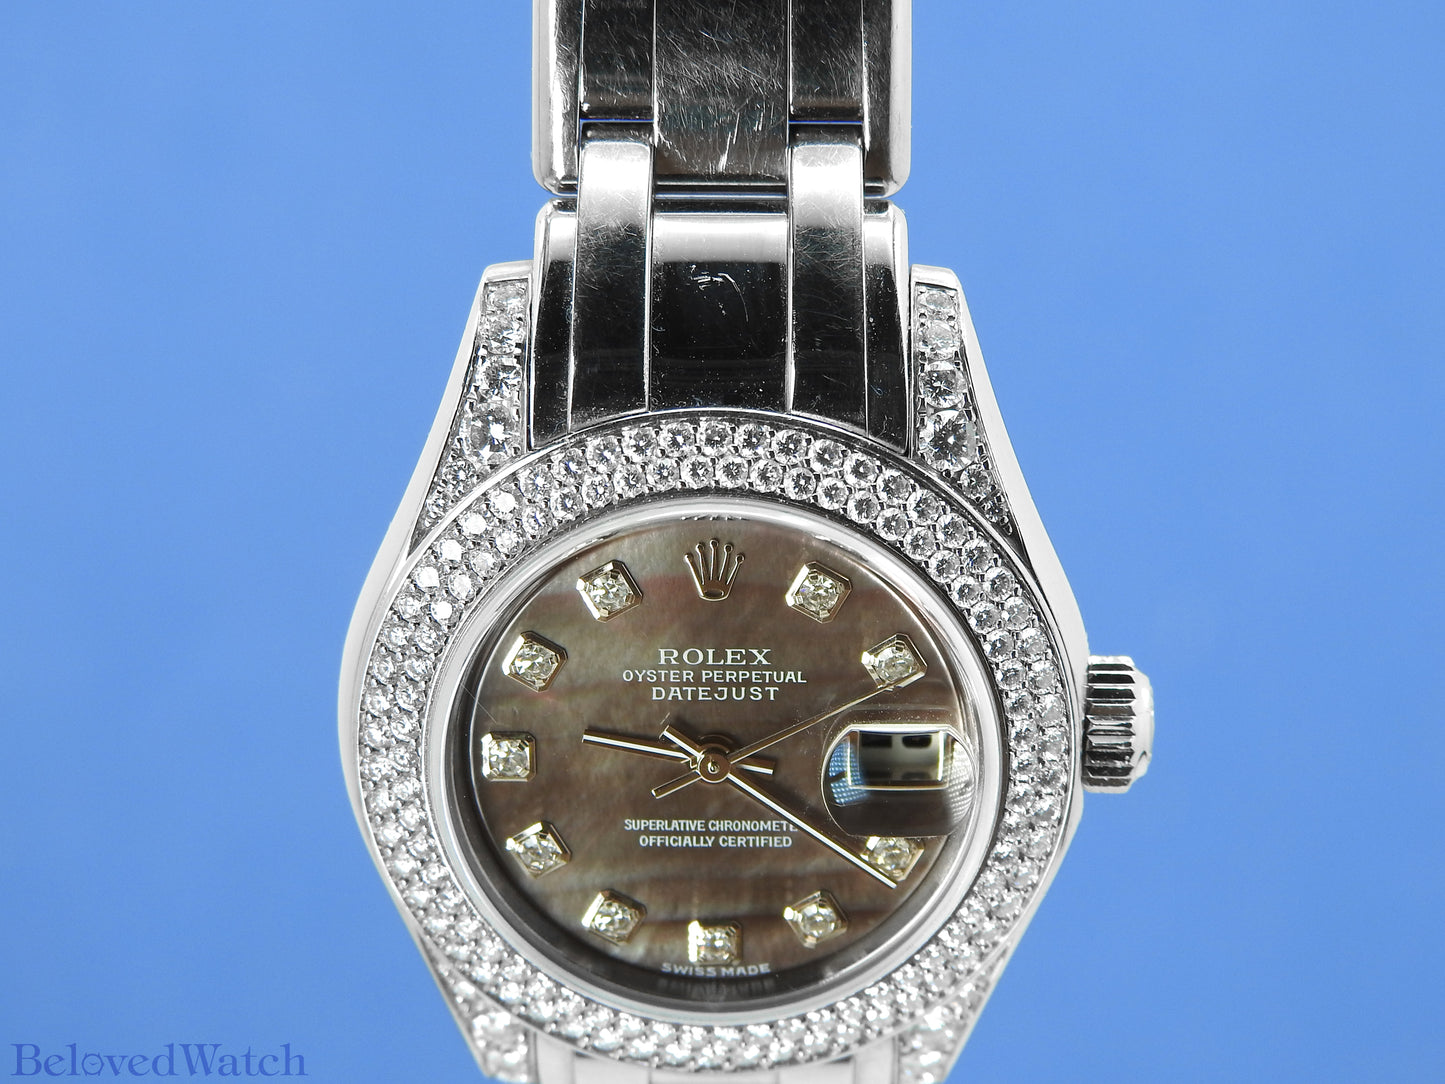 Rolex Pearlmaster 80359